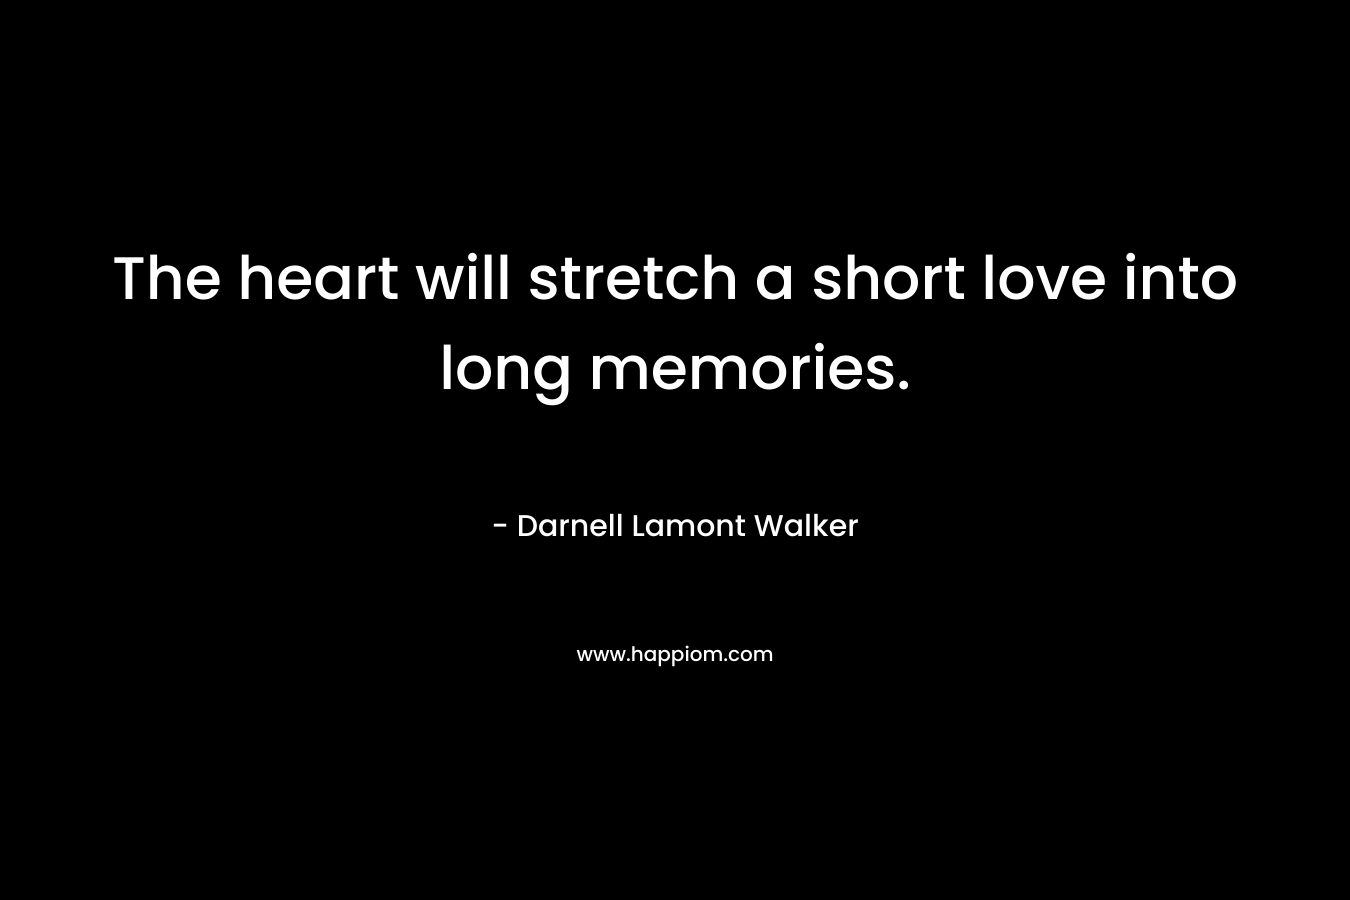 The heart will stretch a short love into long memories.